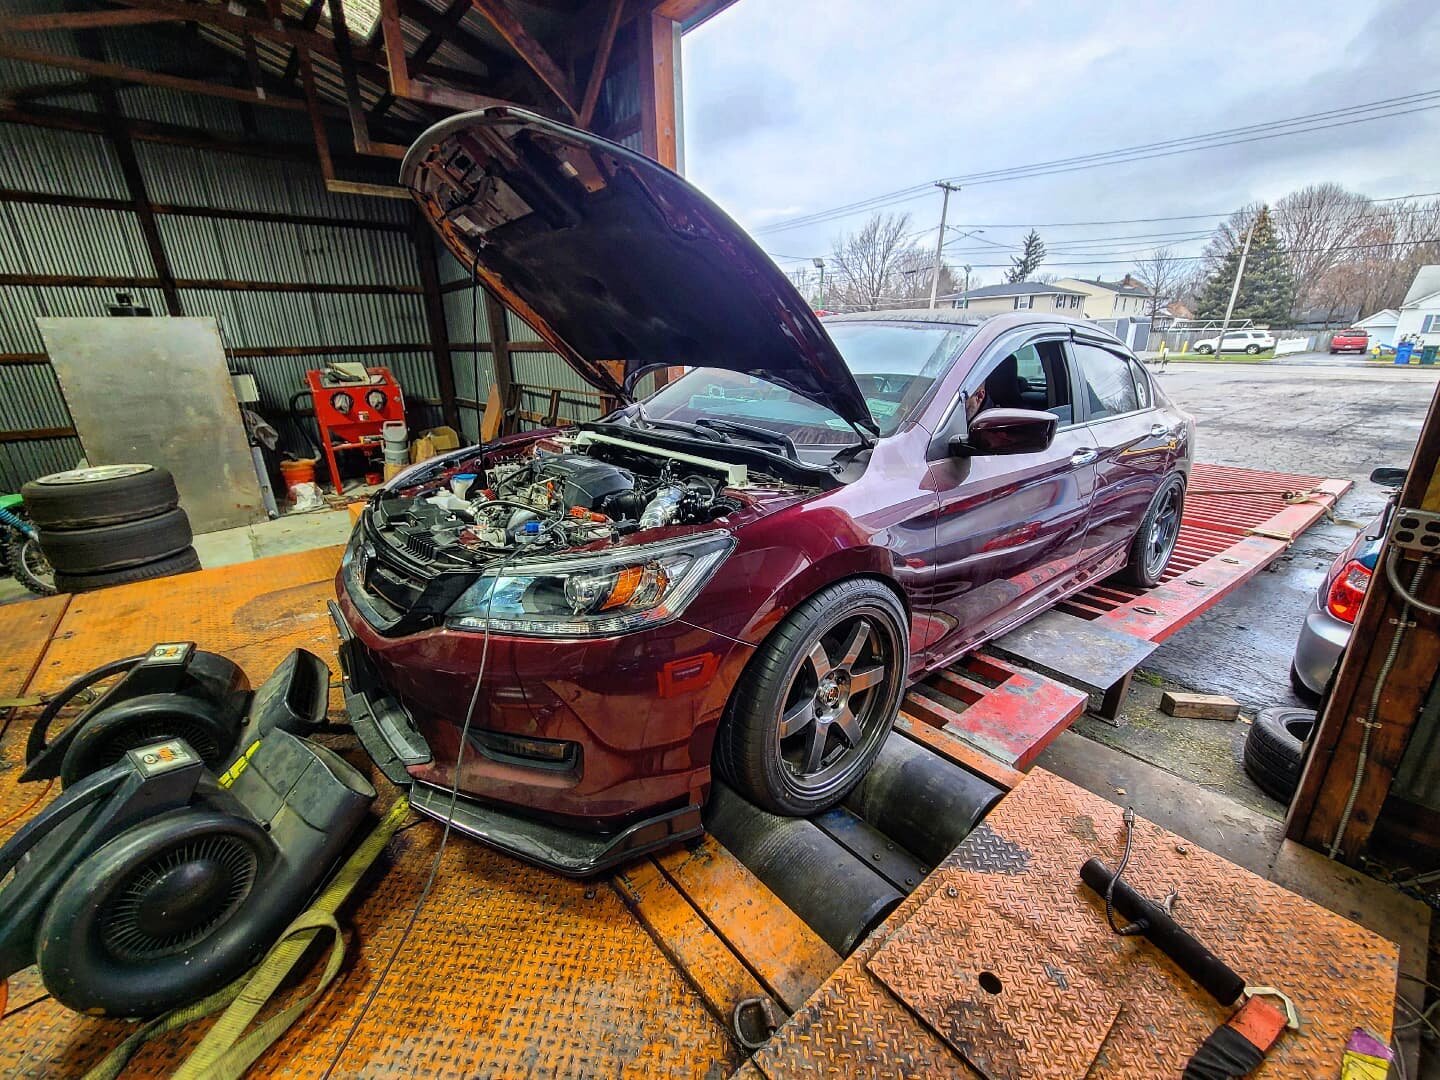 Getting closer to having this custom supercharged + secondary port injection Honda Accord dialed in with the help of @ricktgifford 

Not out of the woods yet, but making good progress! Interesting to see the CVT stand up the demand. More pics and vid